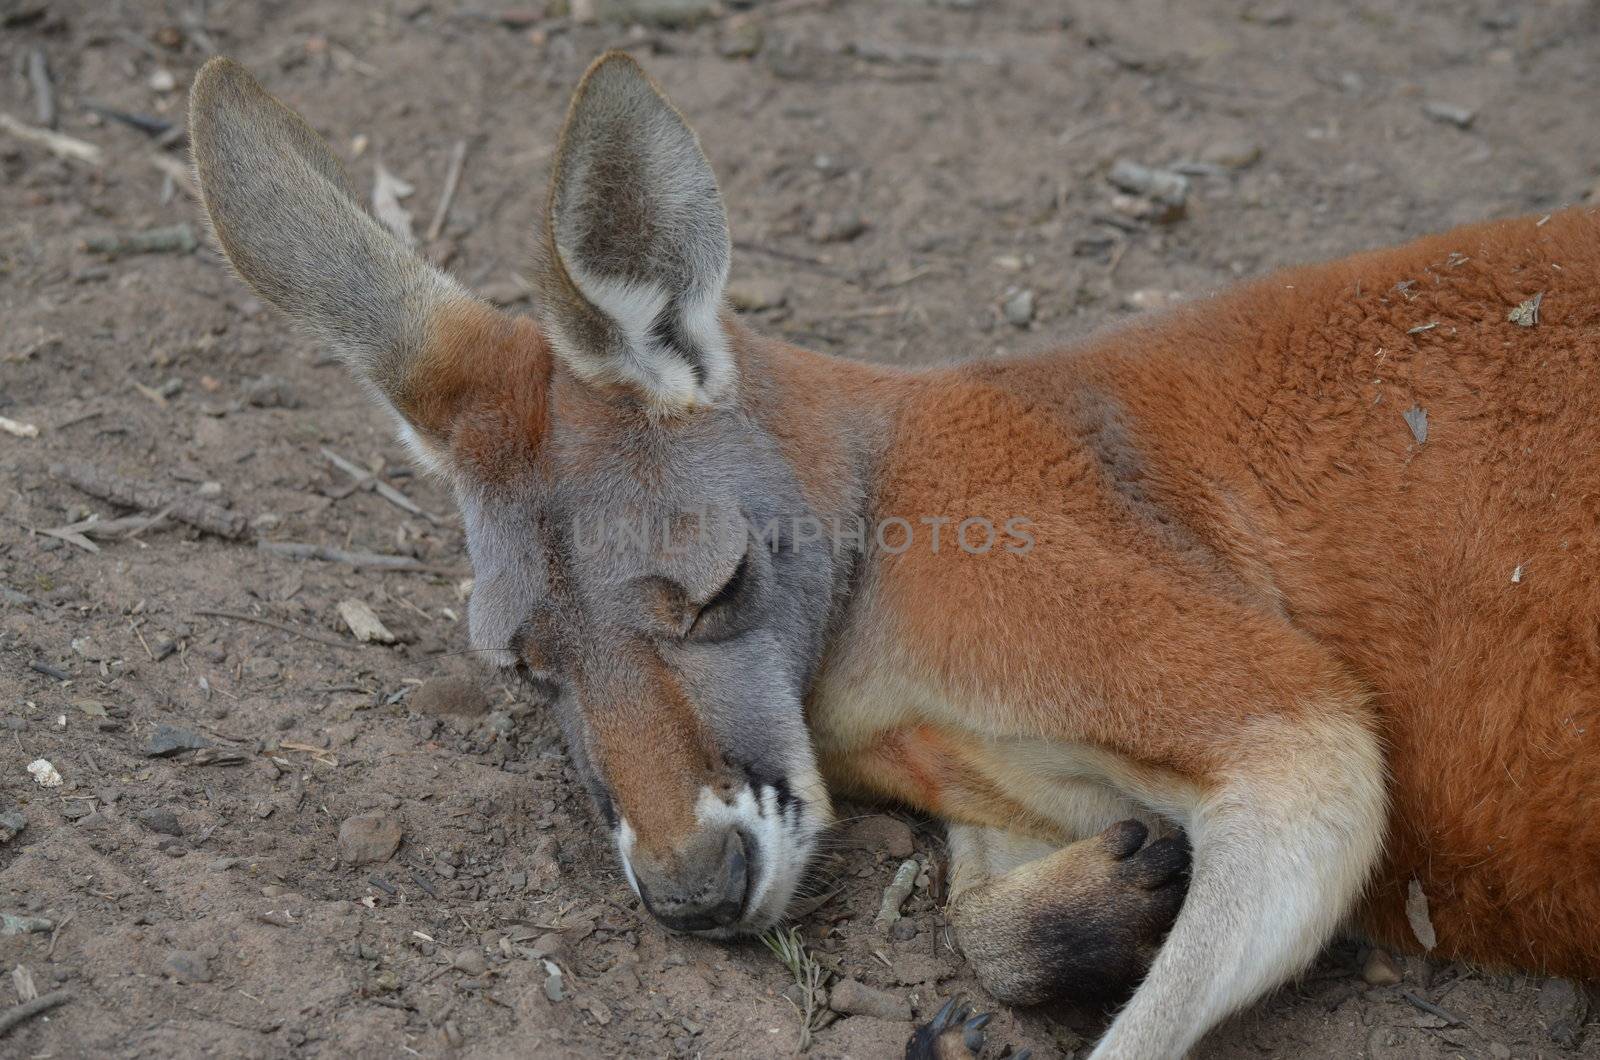 Side profile head shot of a red and grey Australian Kangaroo resting